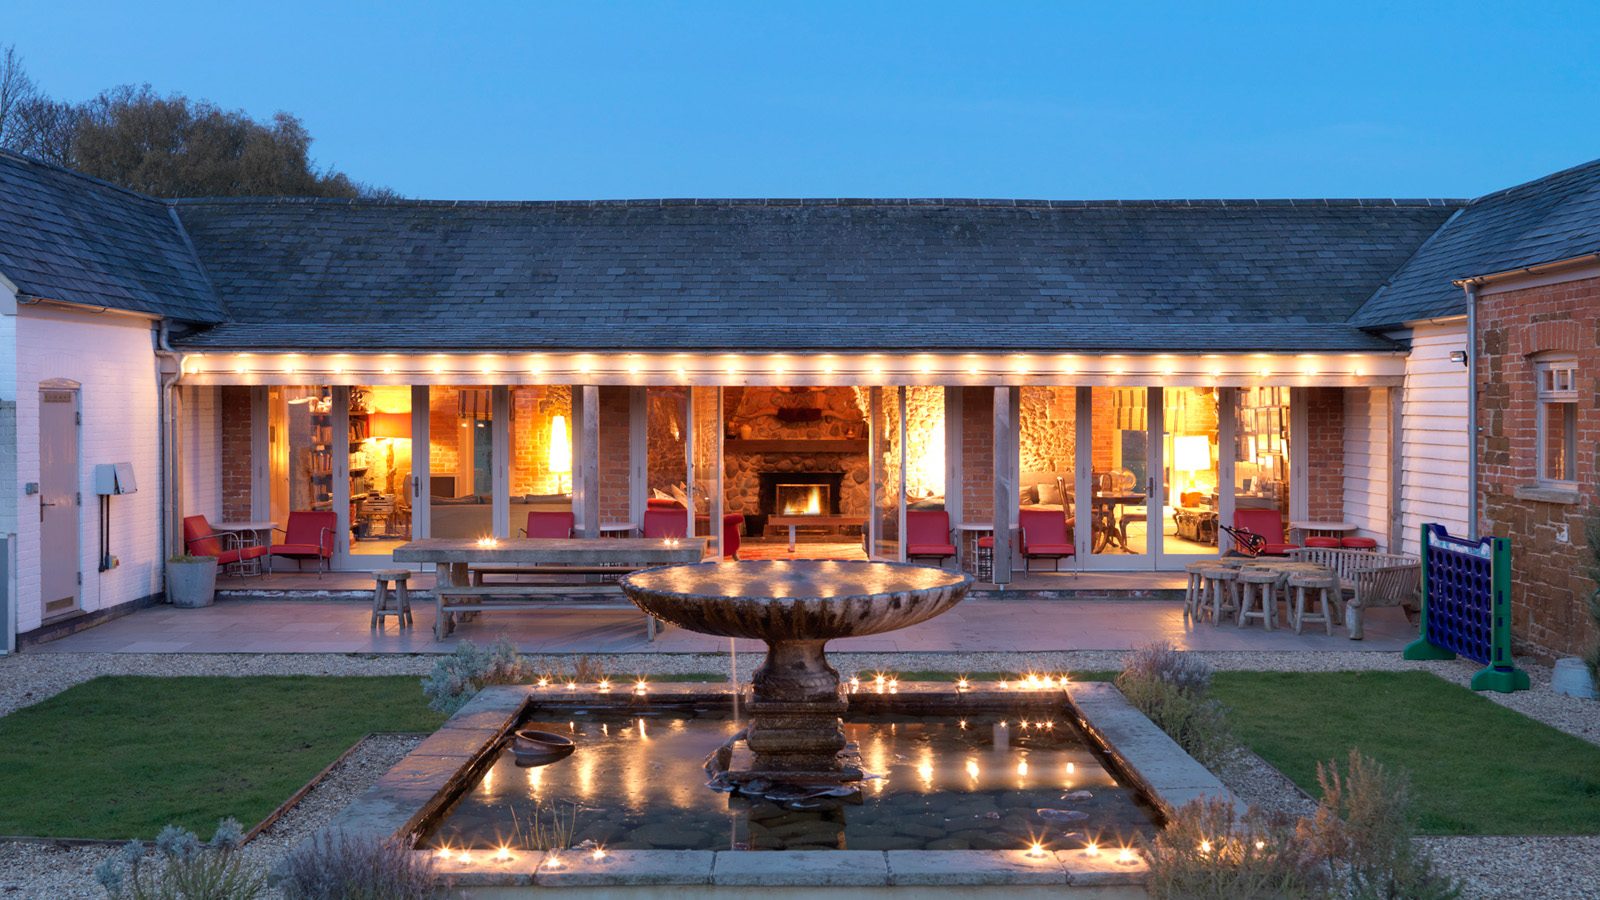  Cliff Barns - kate & tom's Large Holiday Homes